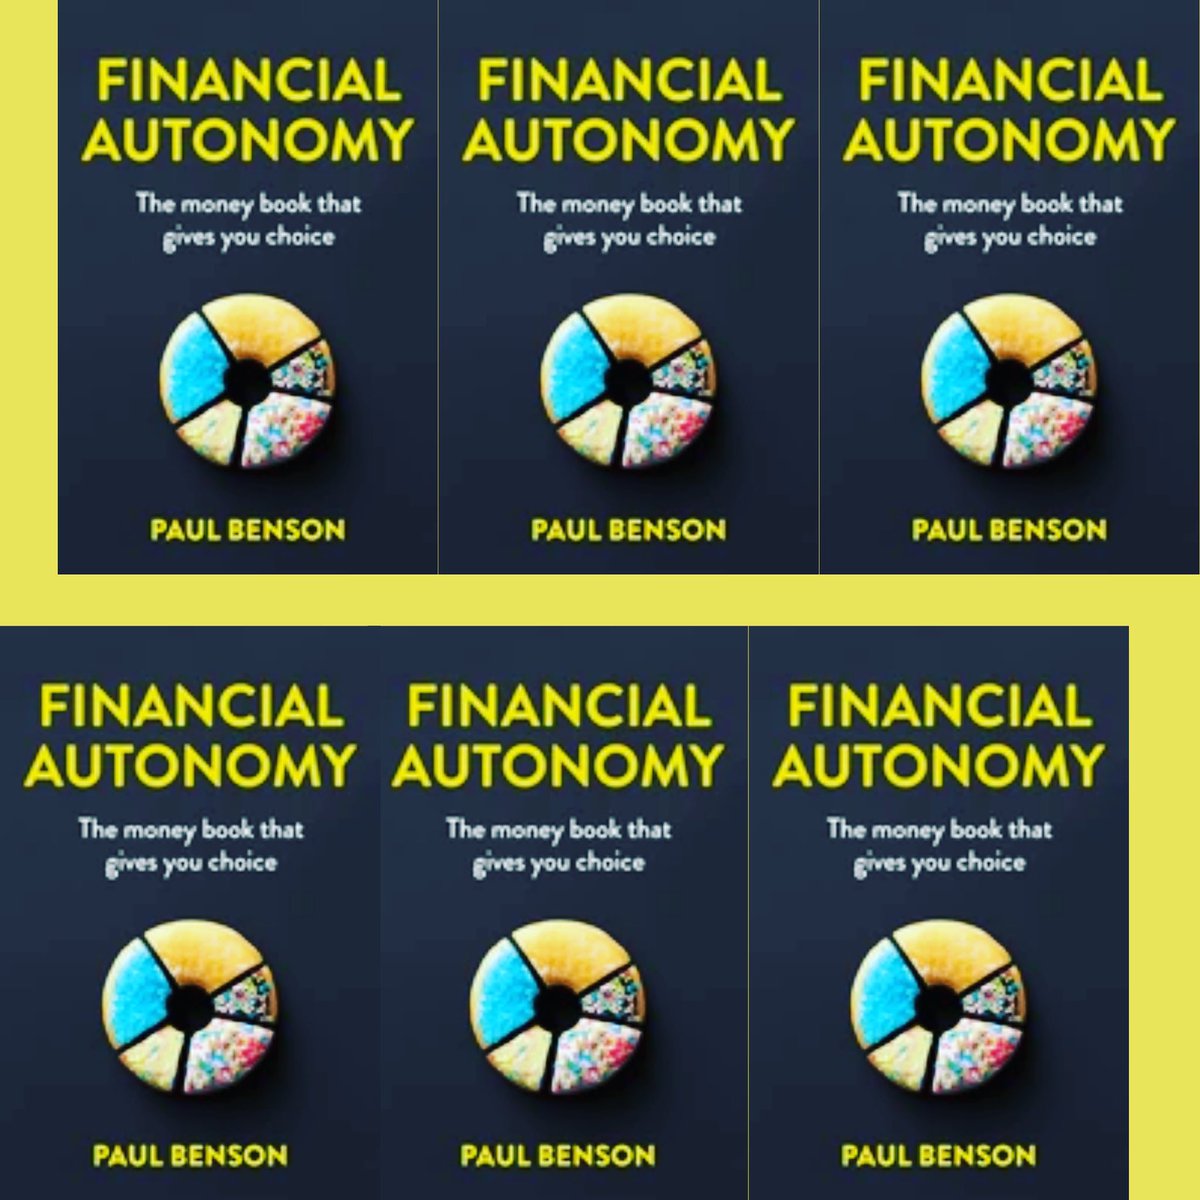 It’s all happening! ✨
Paul Benson’s ‘Financial Autonomy’ has gone to press! 👏🏻 
Coming soon 👀 #august #release #preorder #biolink #moneybooks #financialautonomy #choices #guidance #mondaymotivation